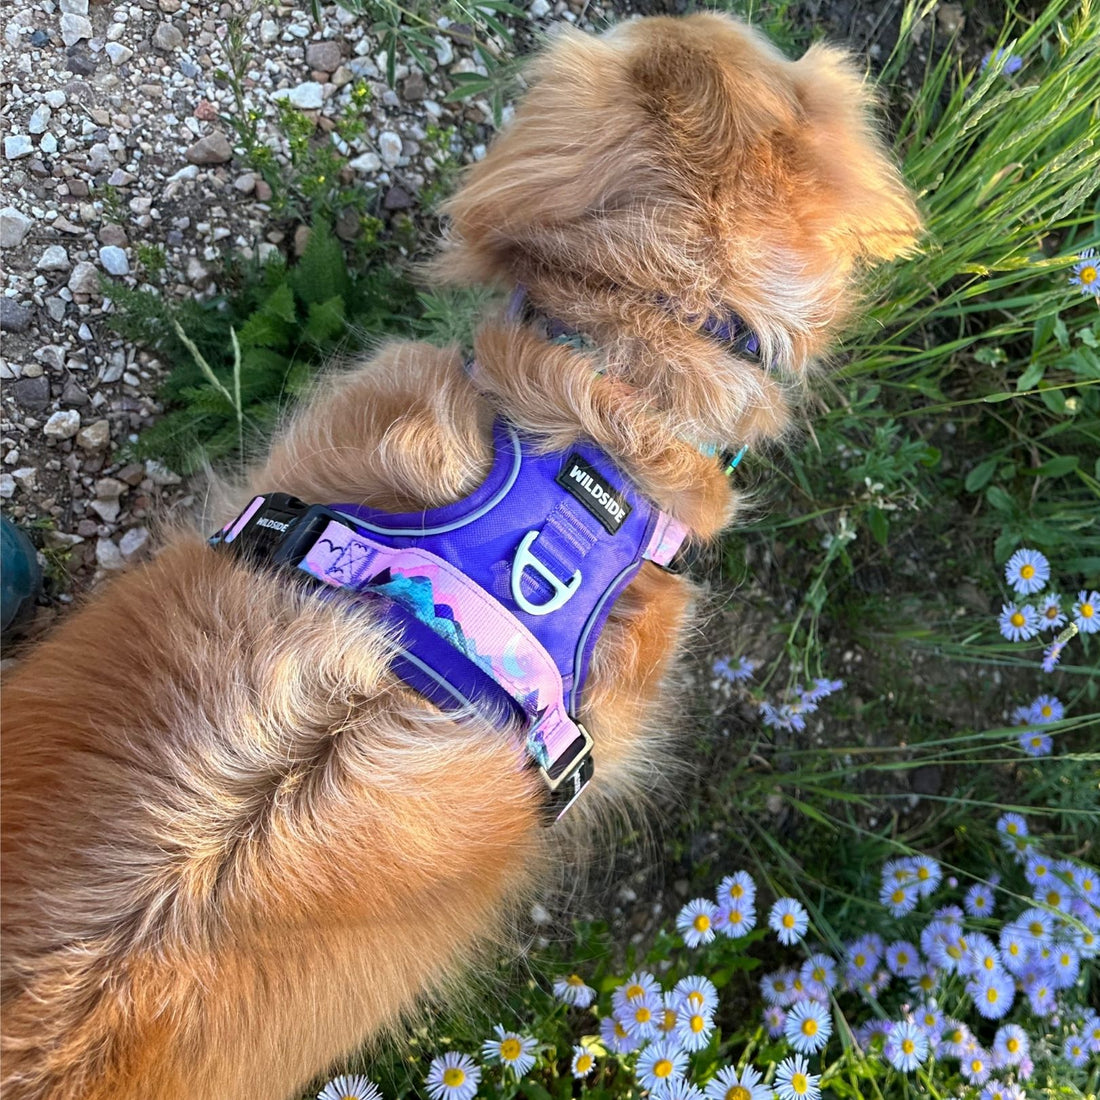 Step-by-Step Guide to Fitting a Dog Harness